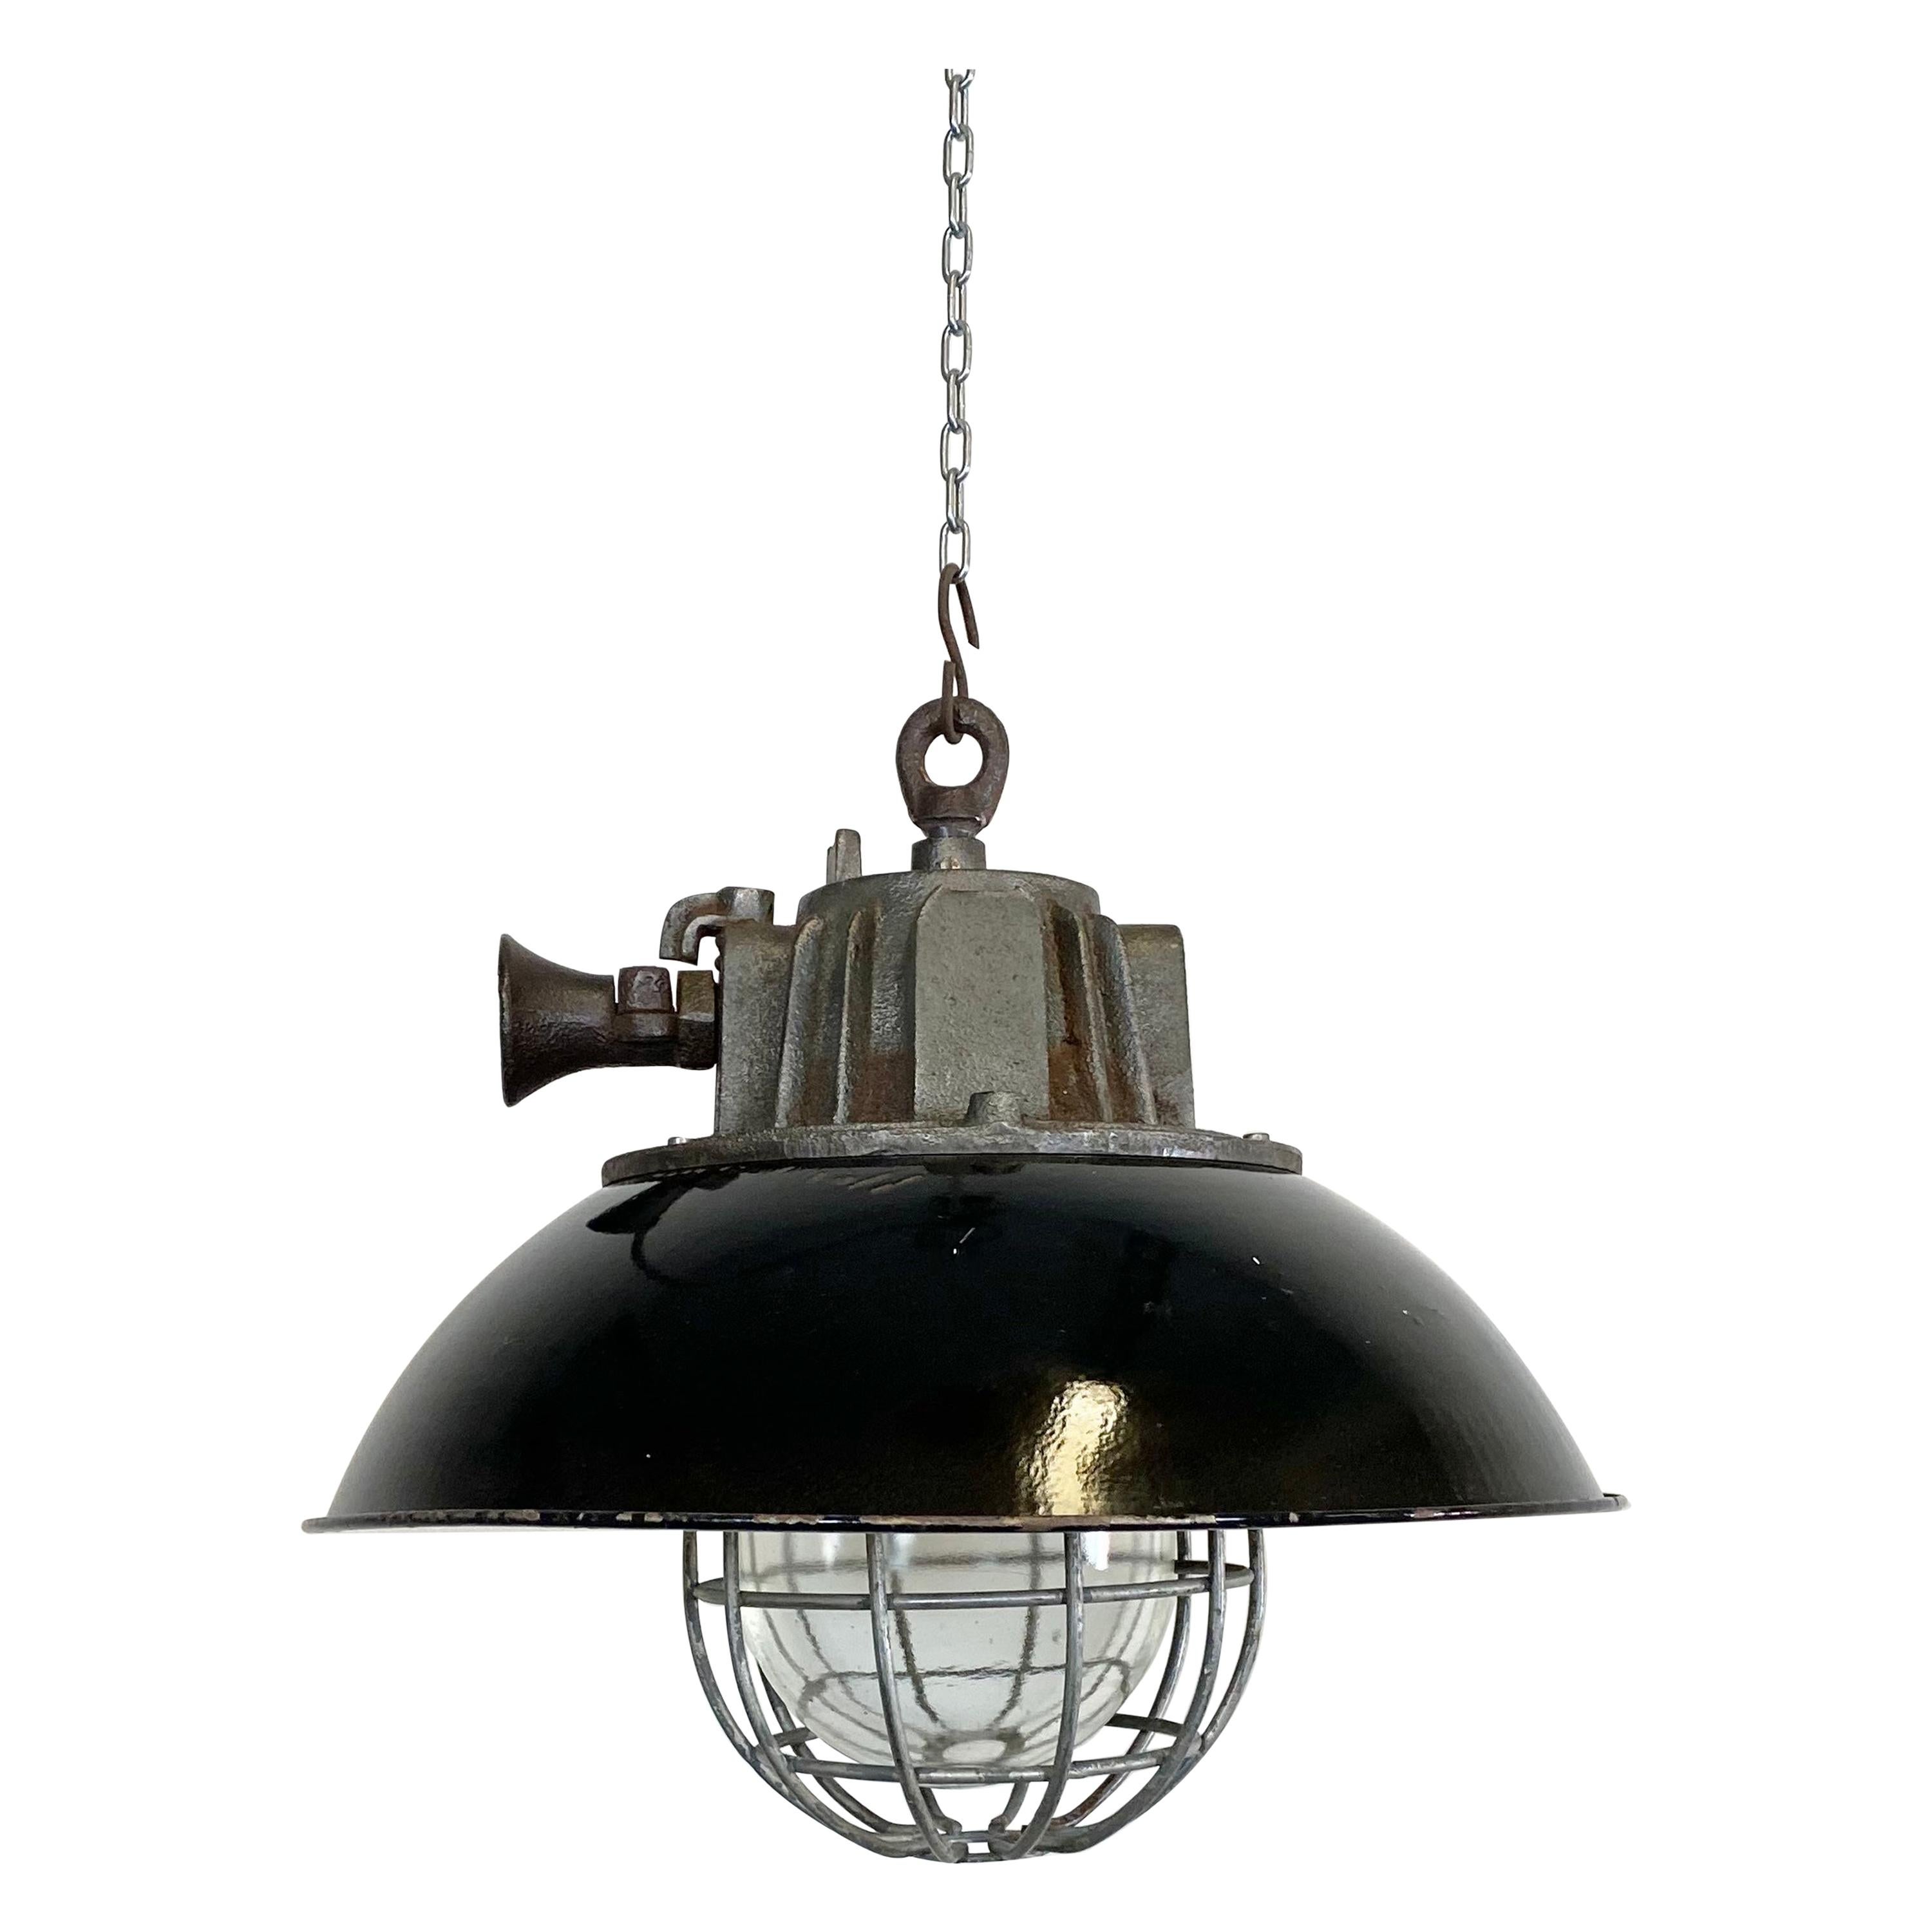 Black Enamel and Cast Iron Industrial Cage Pendant Light, 1950s For Sale